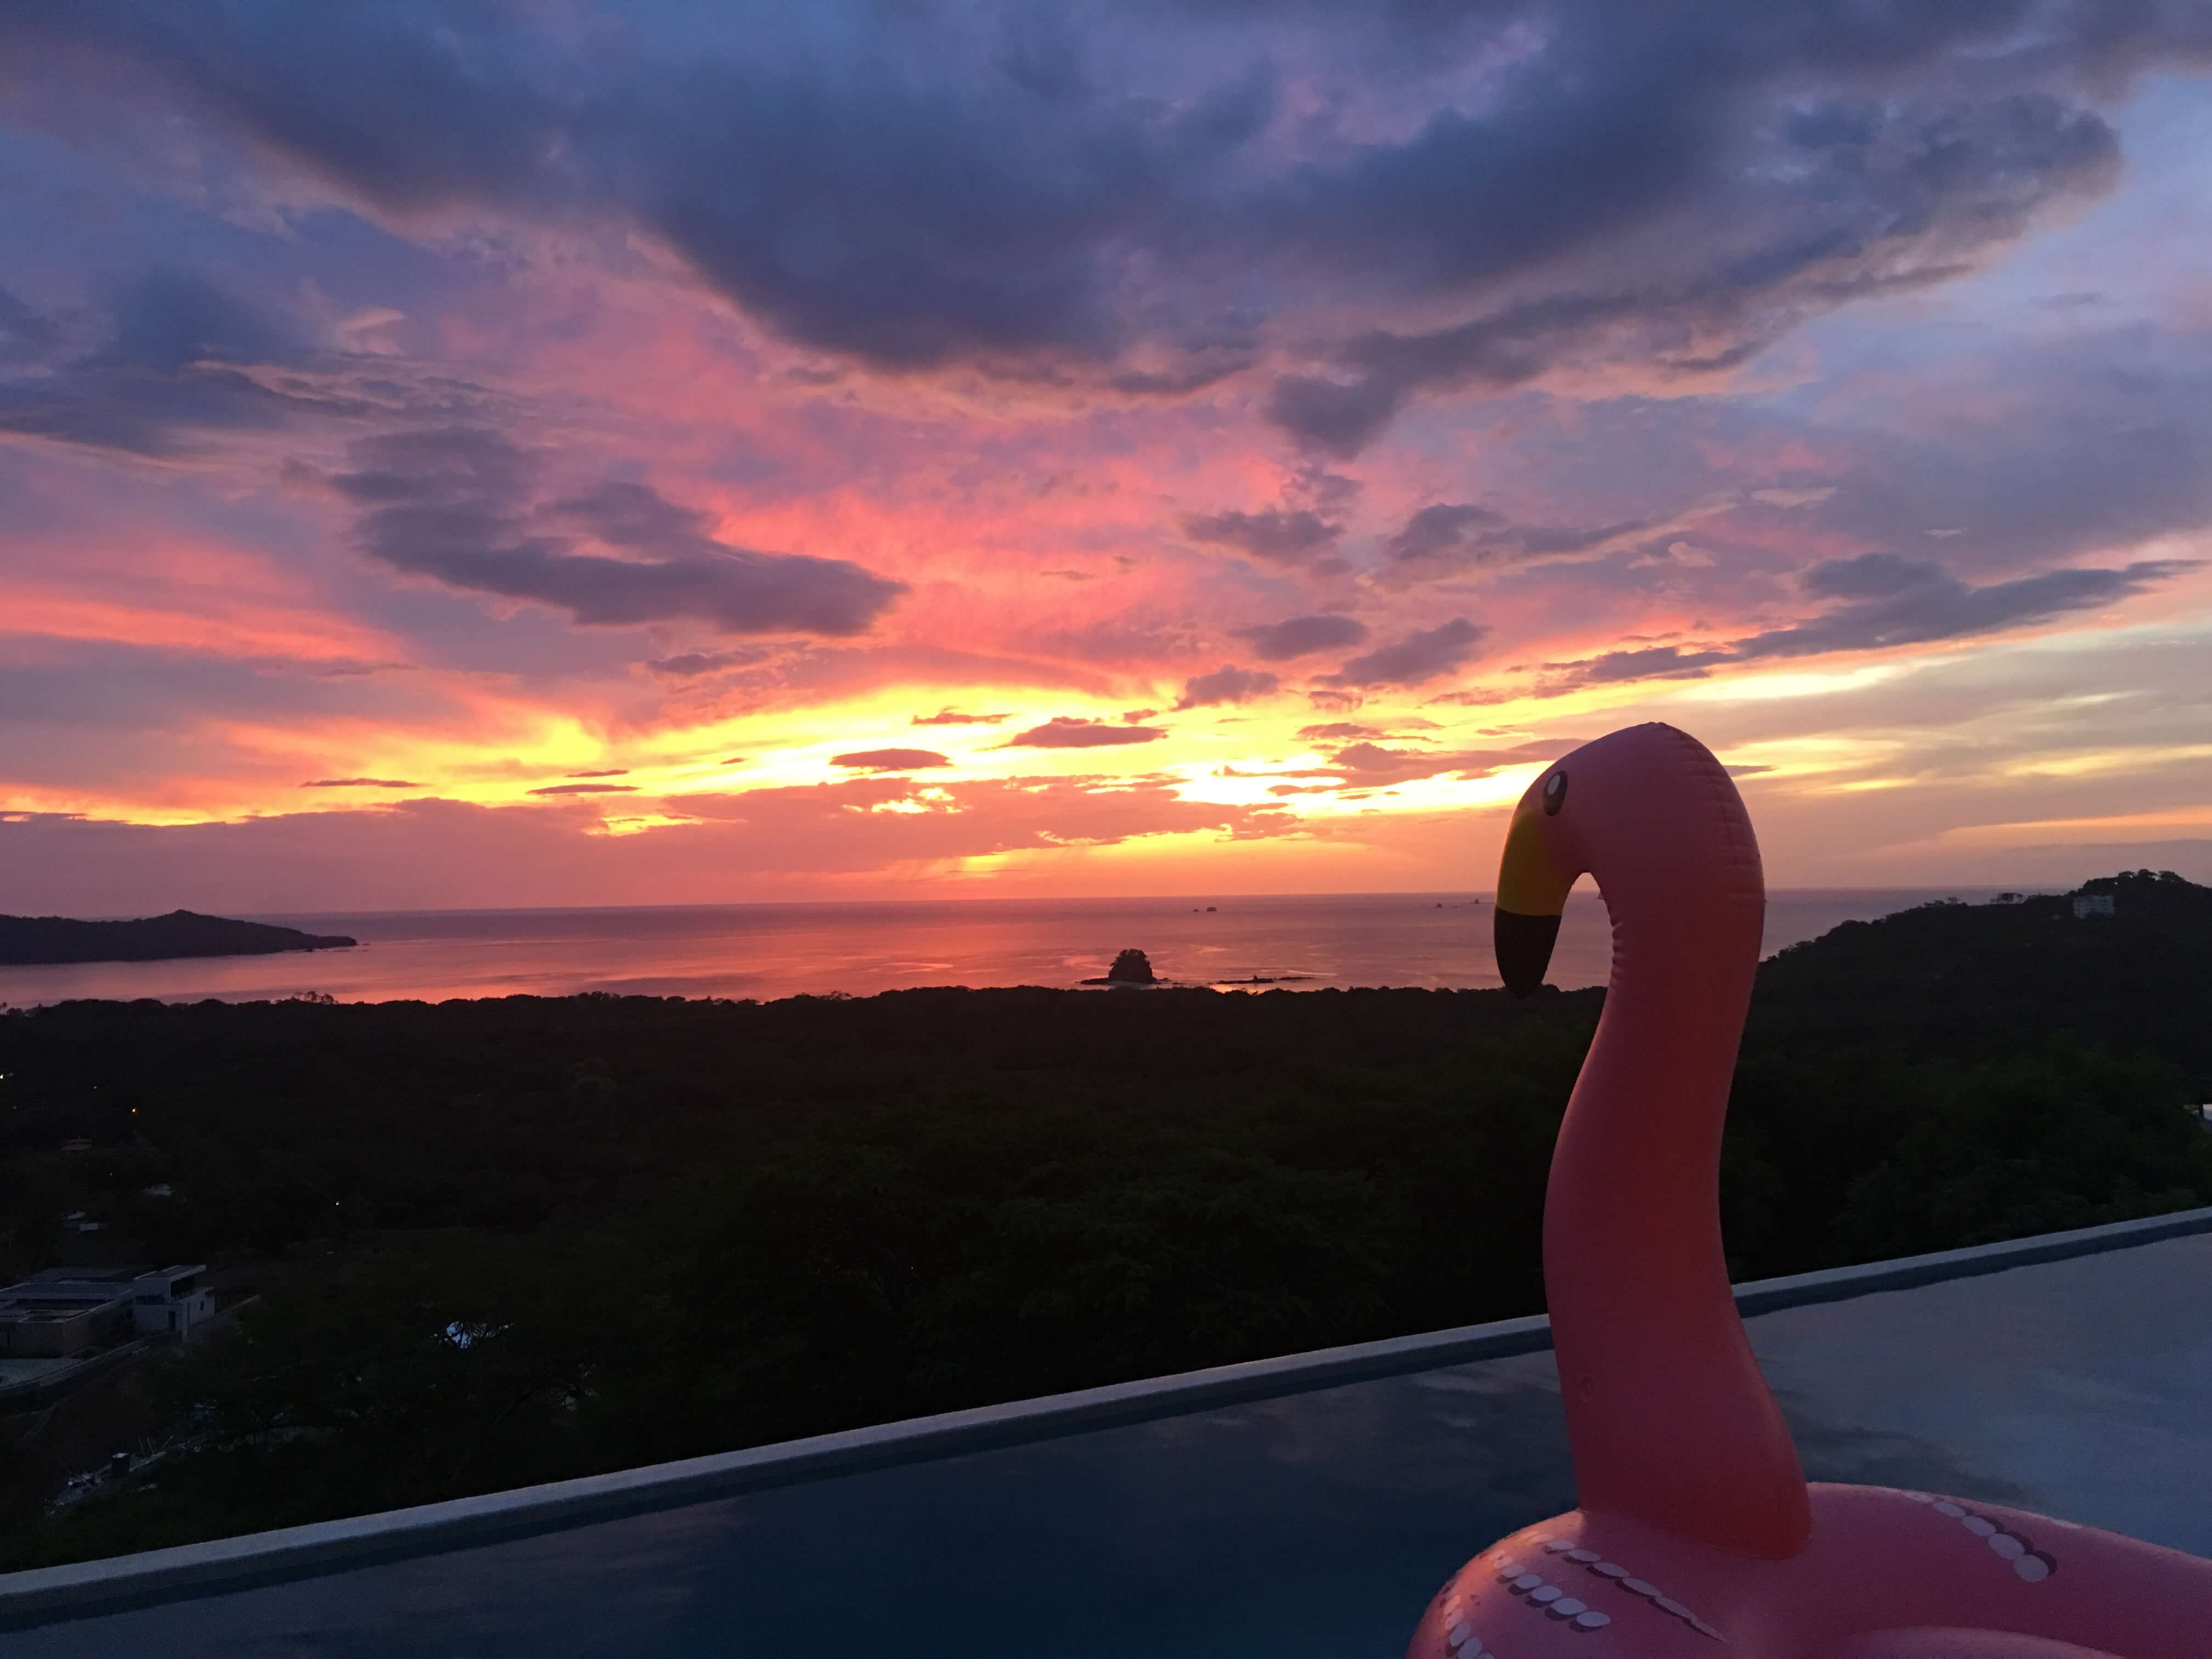 Pink, yellow and orange sky as the sun goes down in Guanacaste Costa Rica.